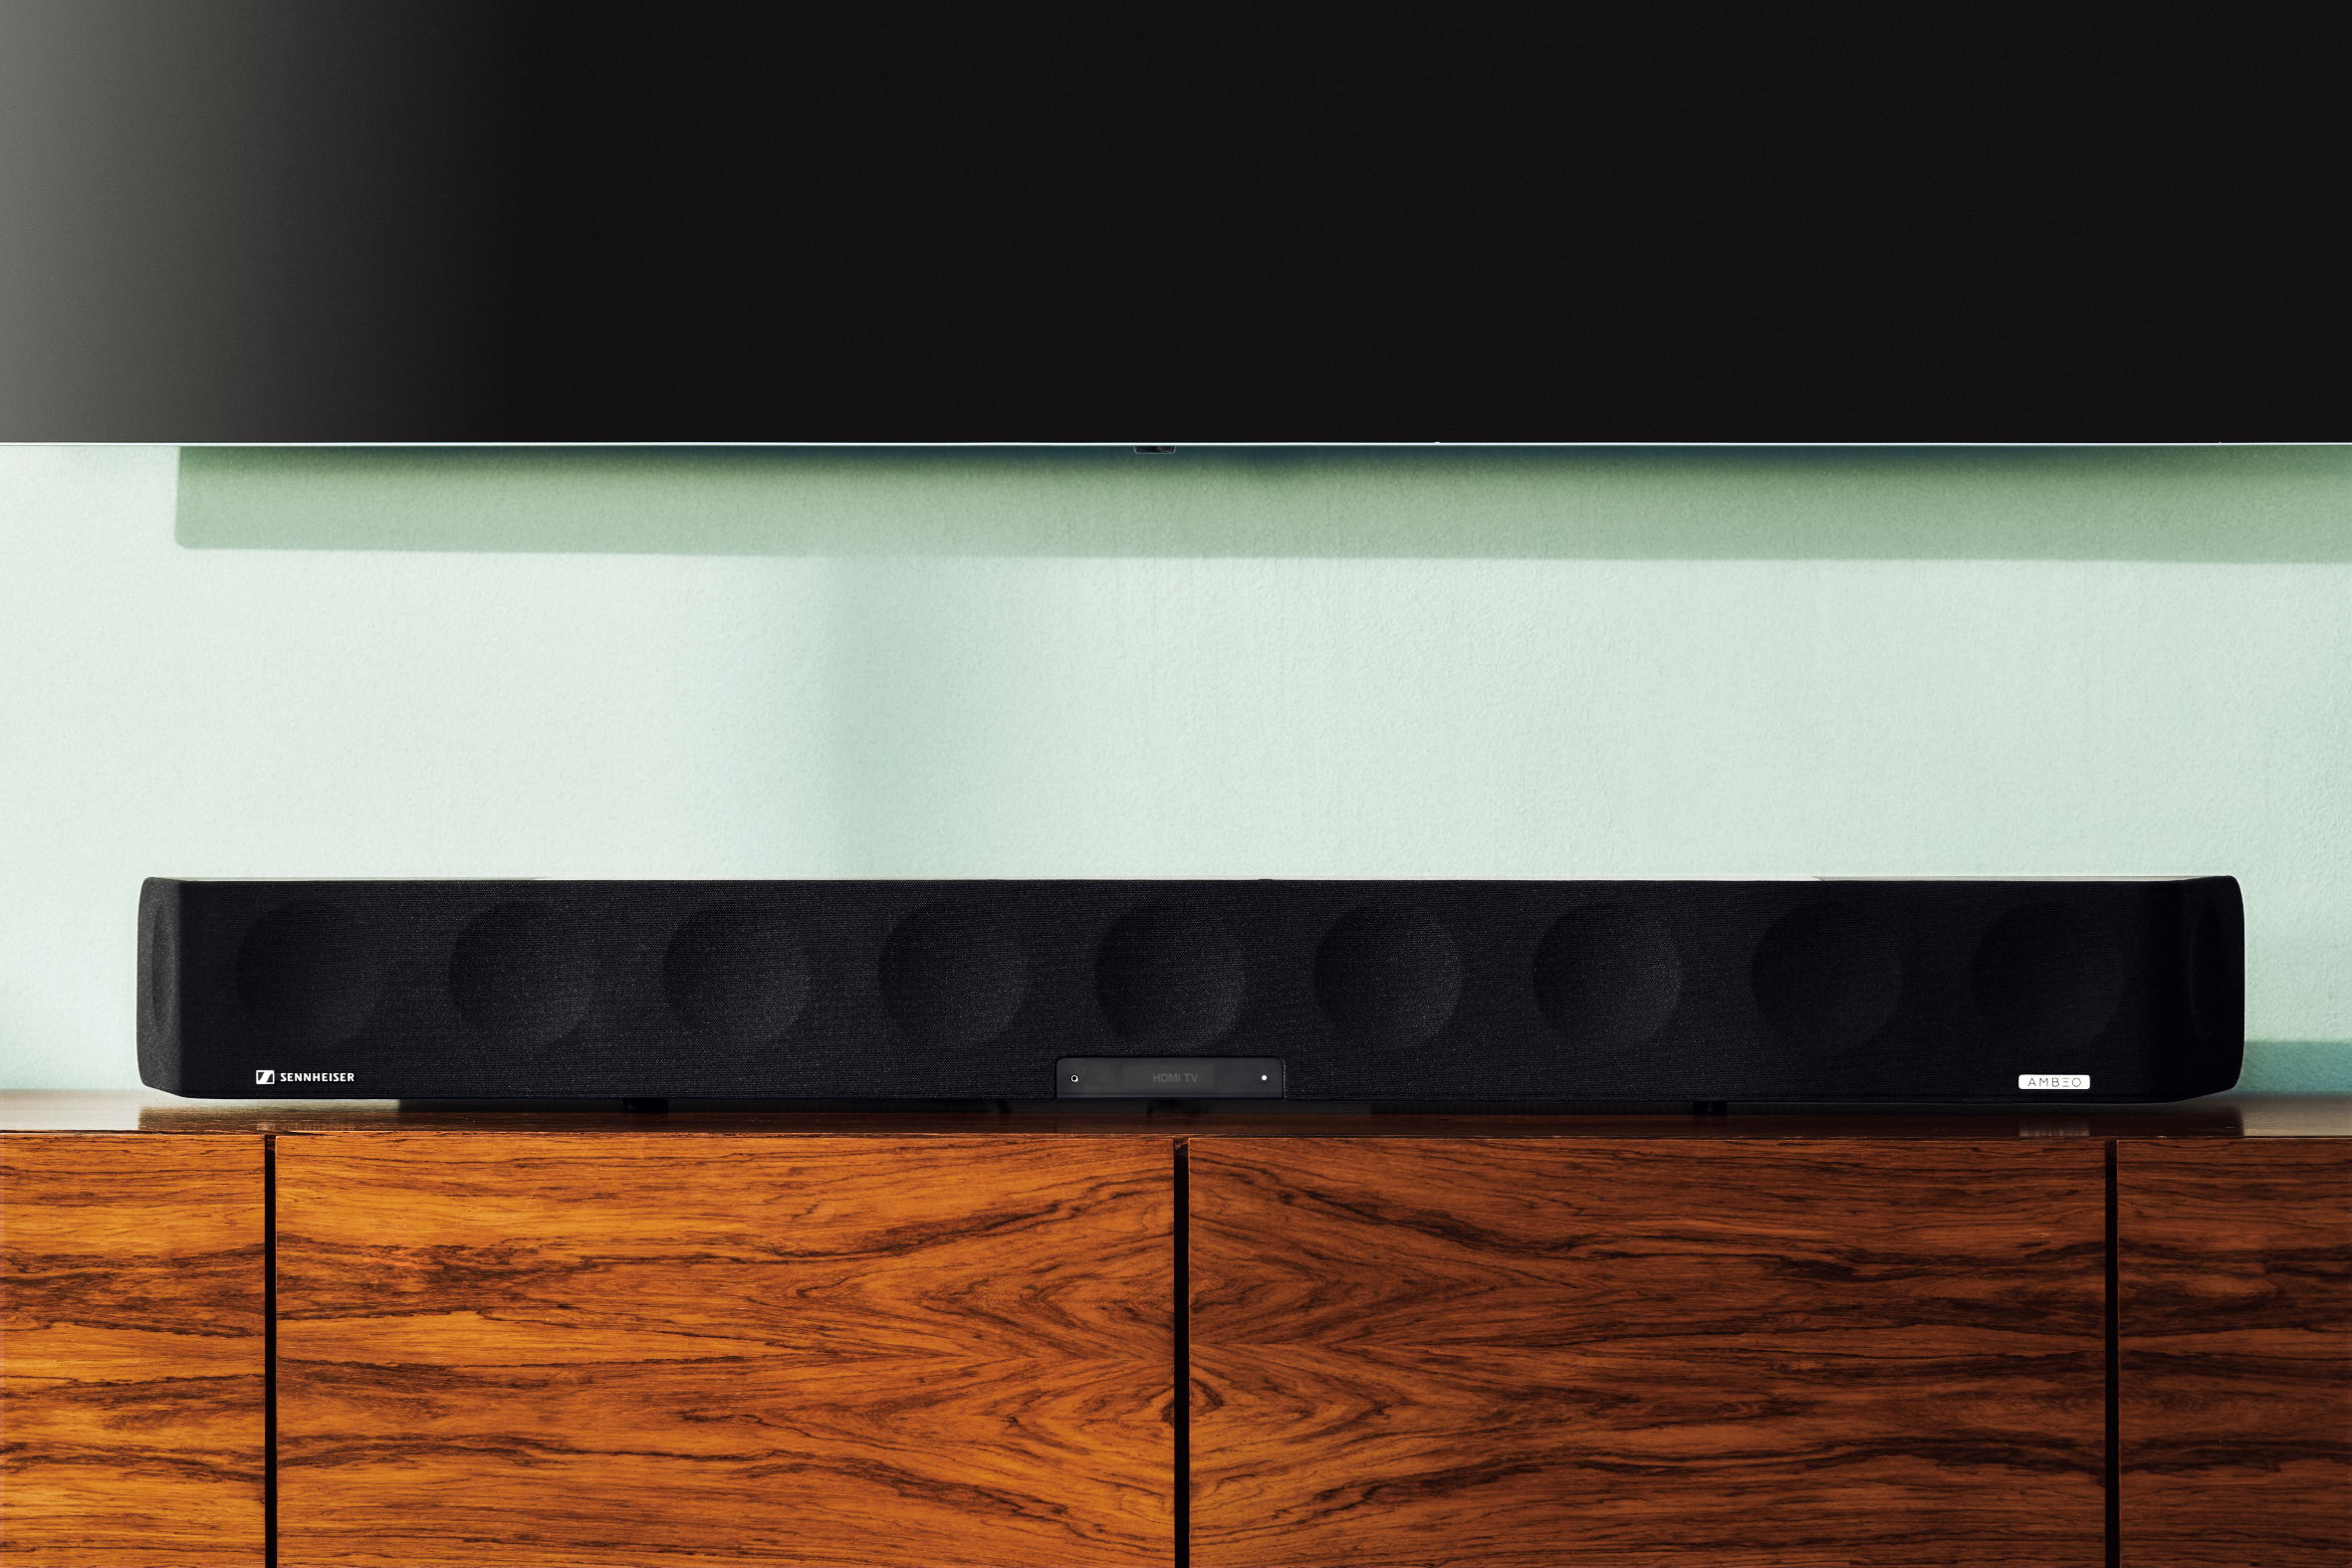 The AMBEO Soundbar delivers an immersive 3D sound experience from a single all-in-one device.